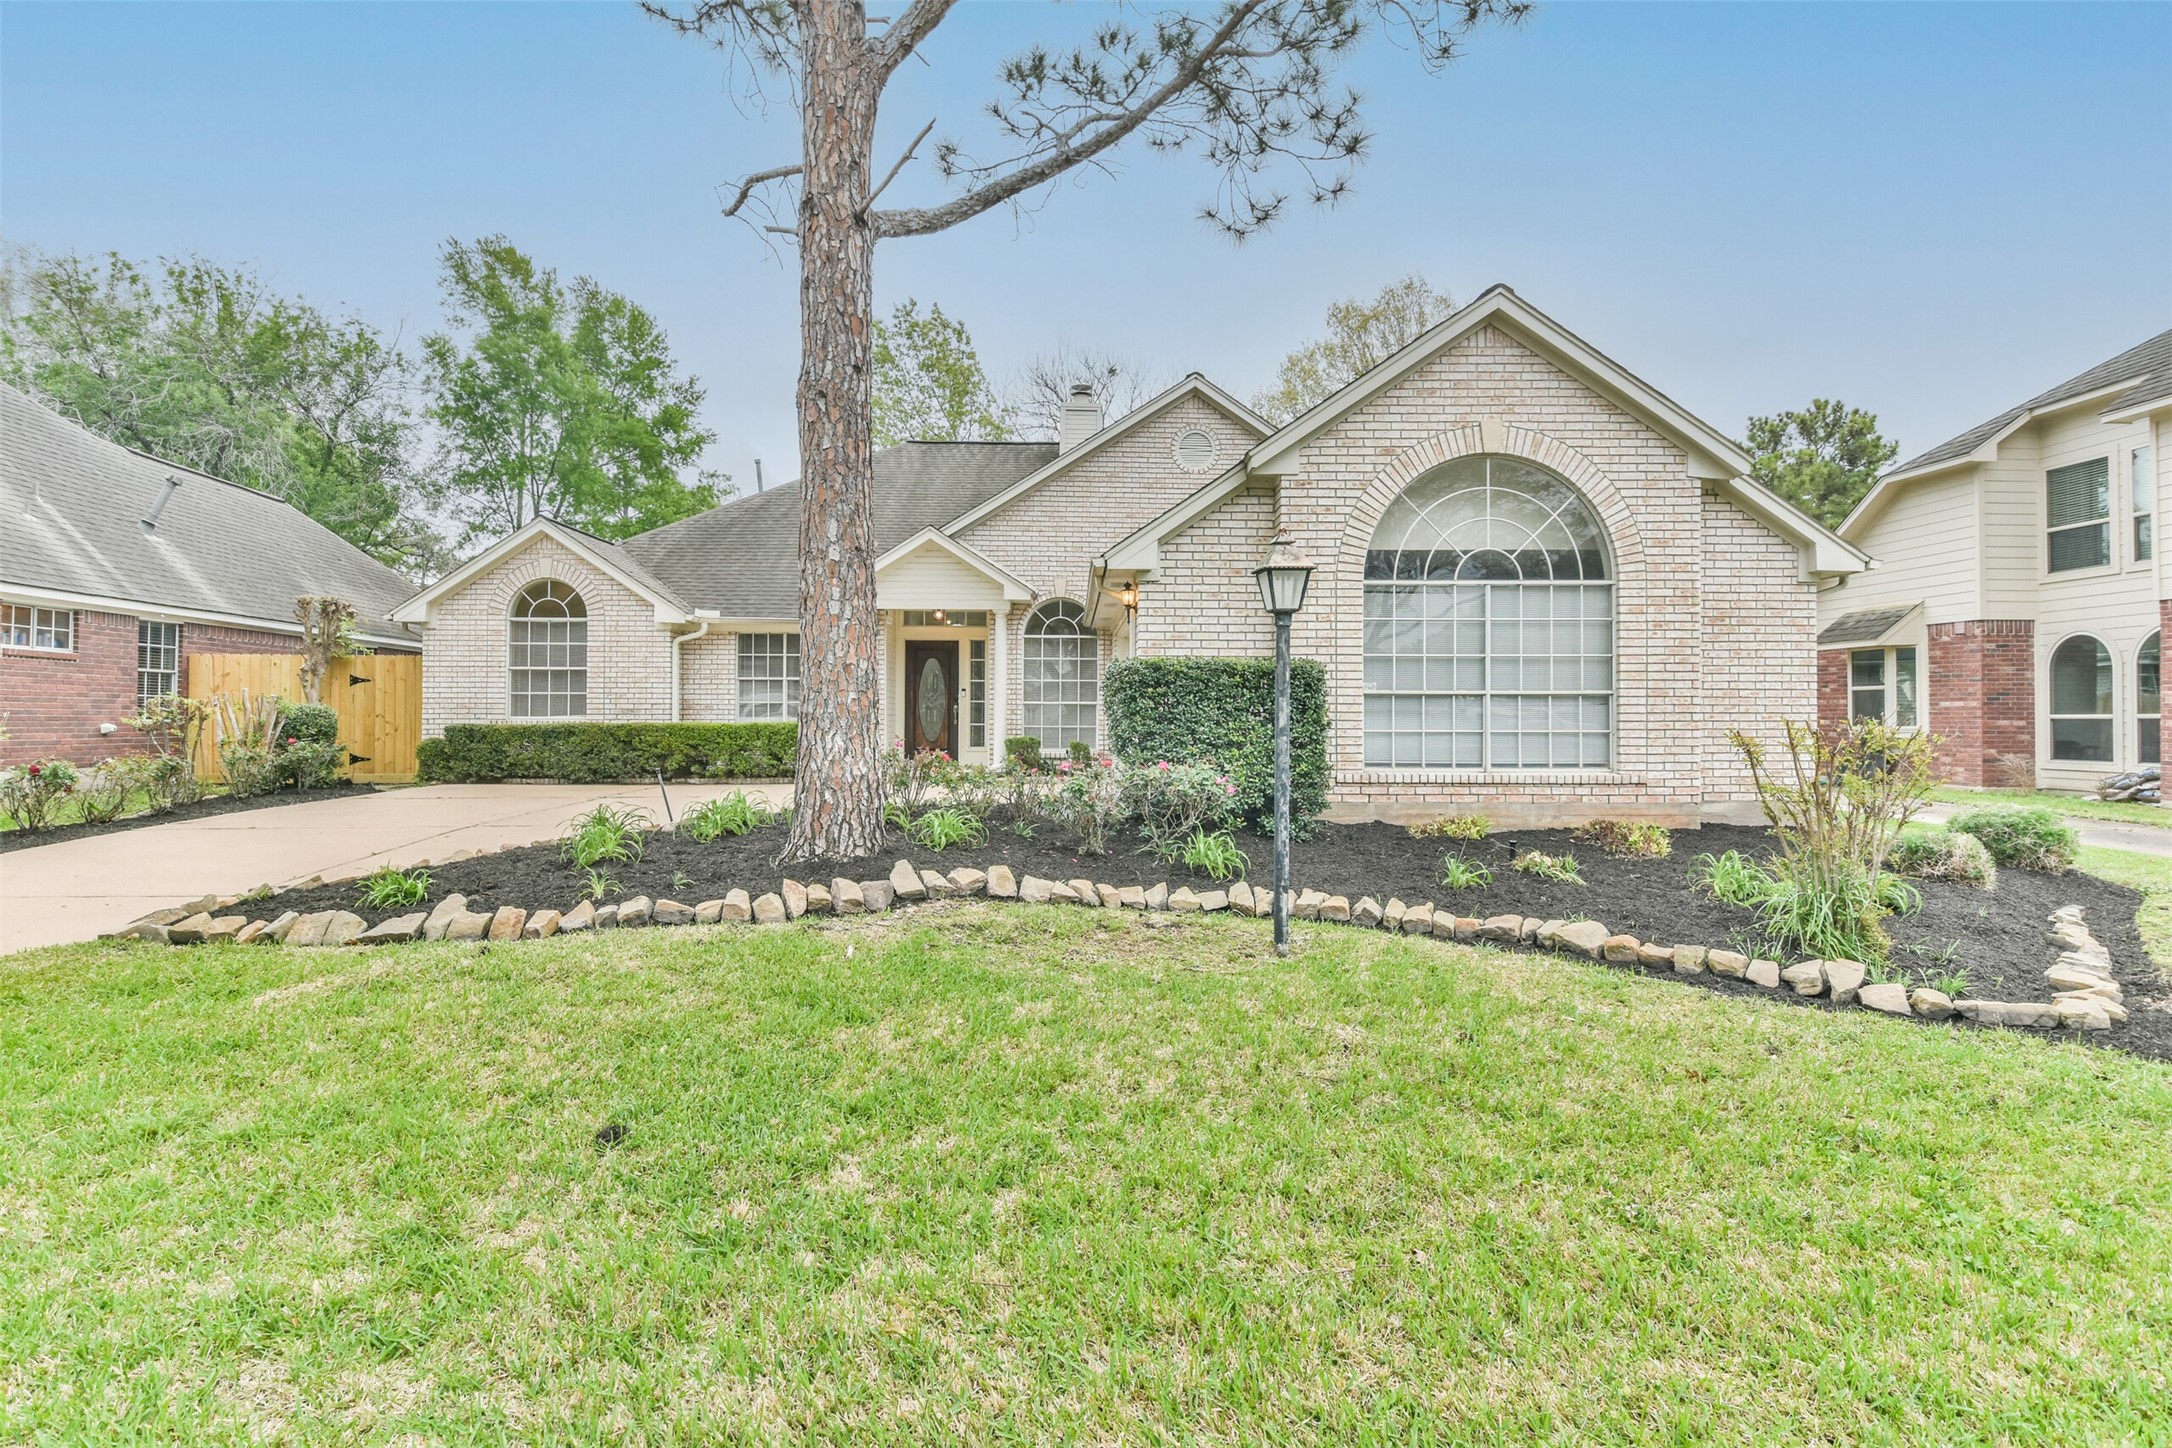 Welcome home to 15406 Redbud Leaf Lane in Fairfield's Garden Grove community!